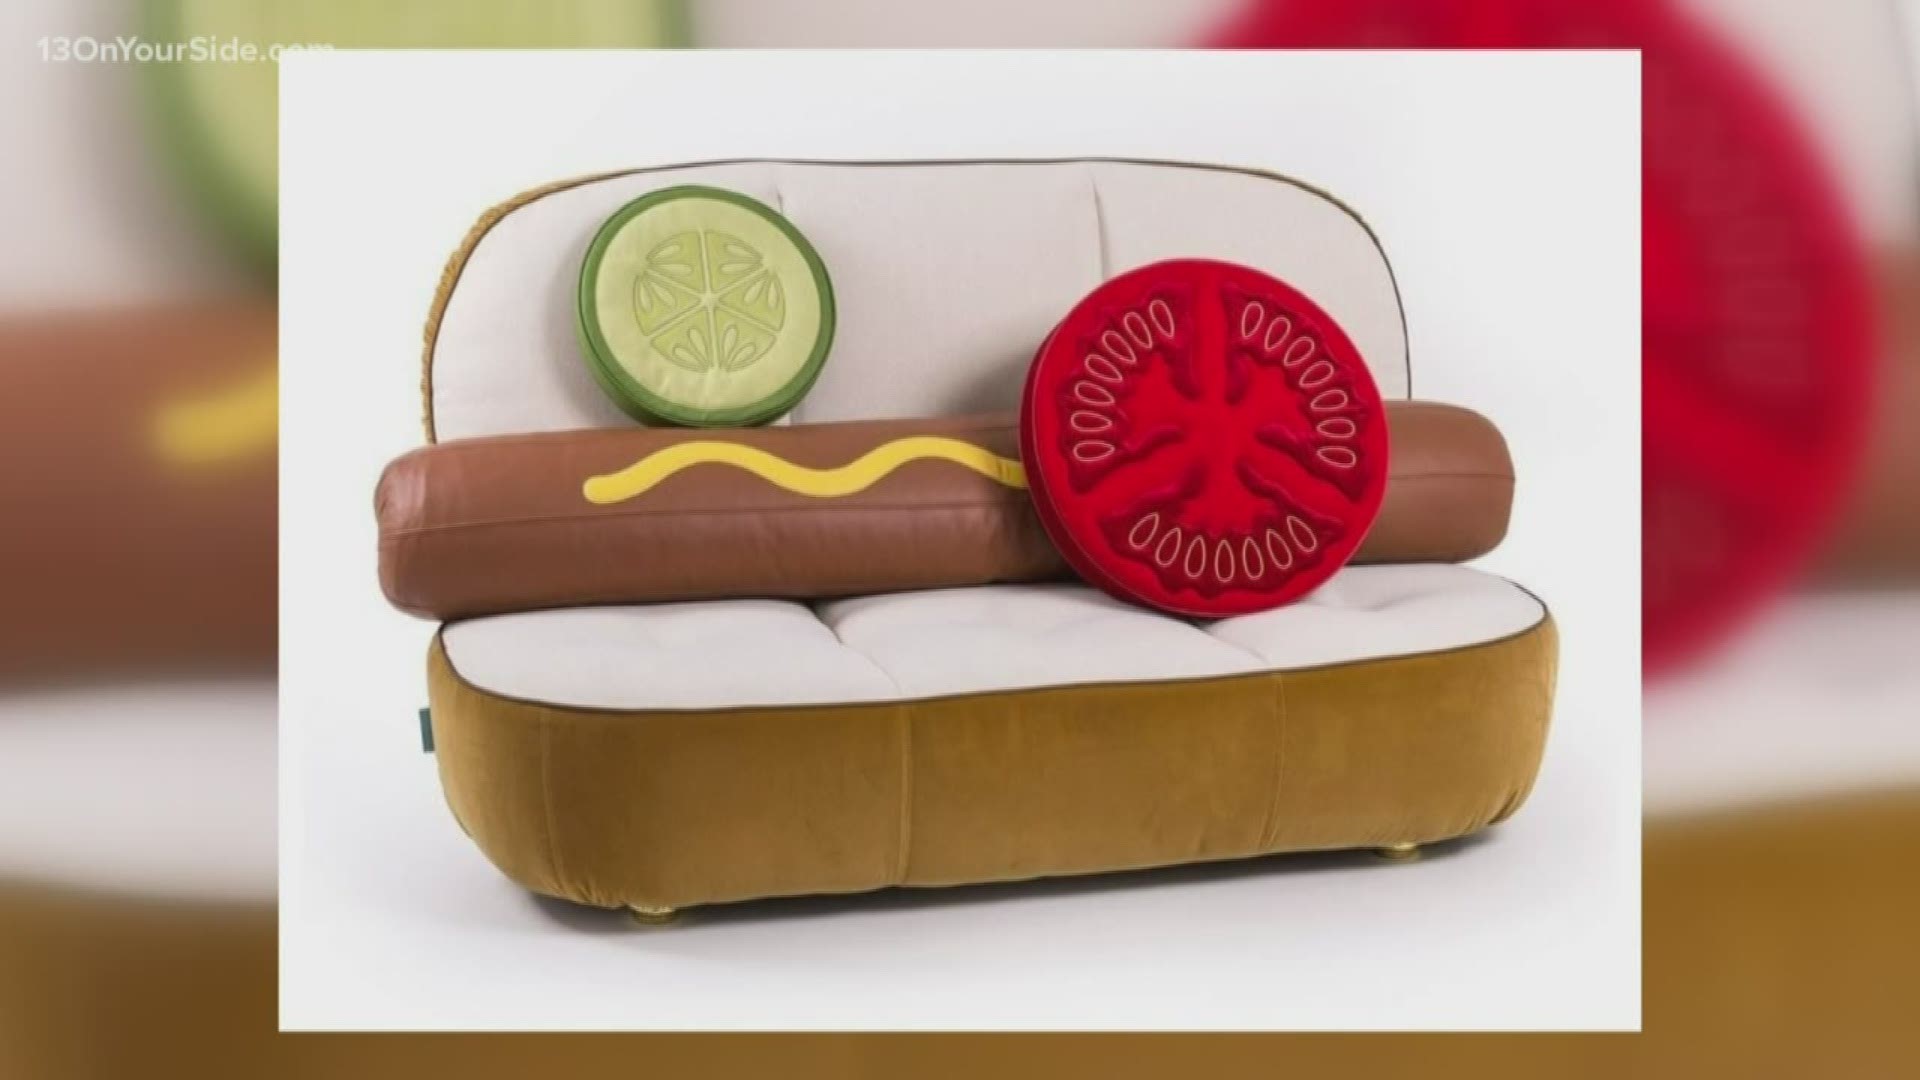 Is it quirky and funny...? Or just weird? Apparently now you can buy a sofa in the shape and likeness of a hot dog?